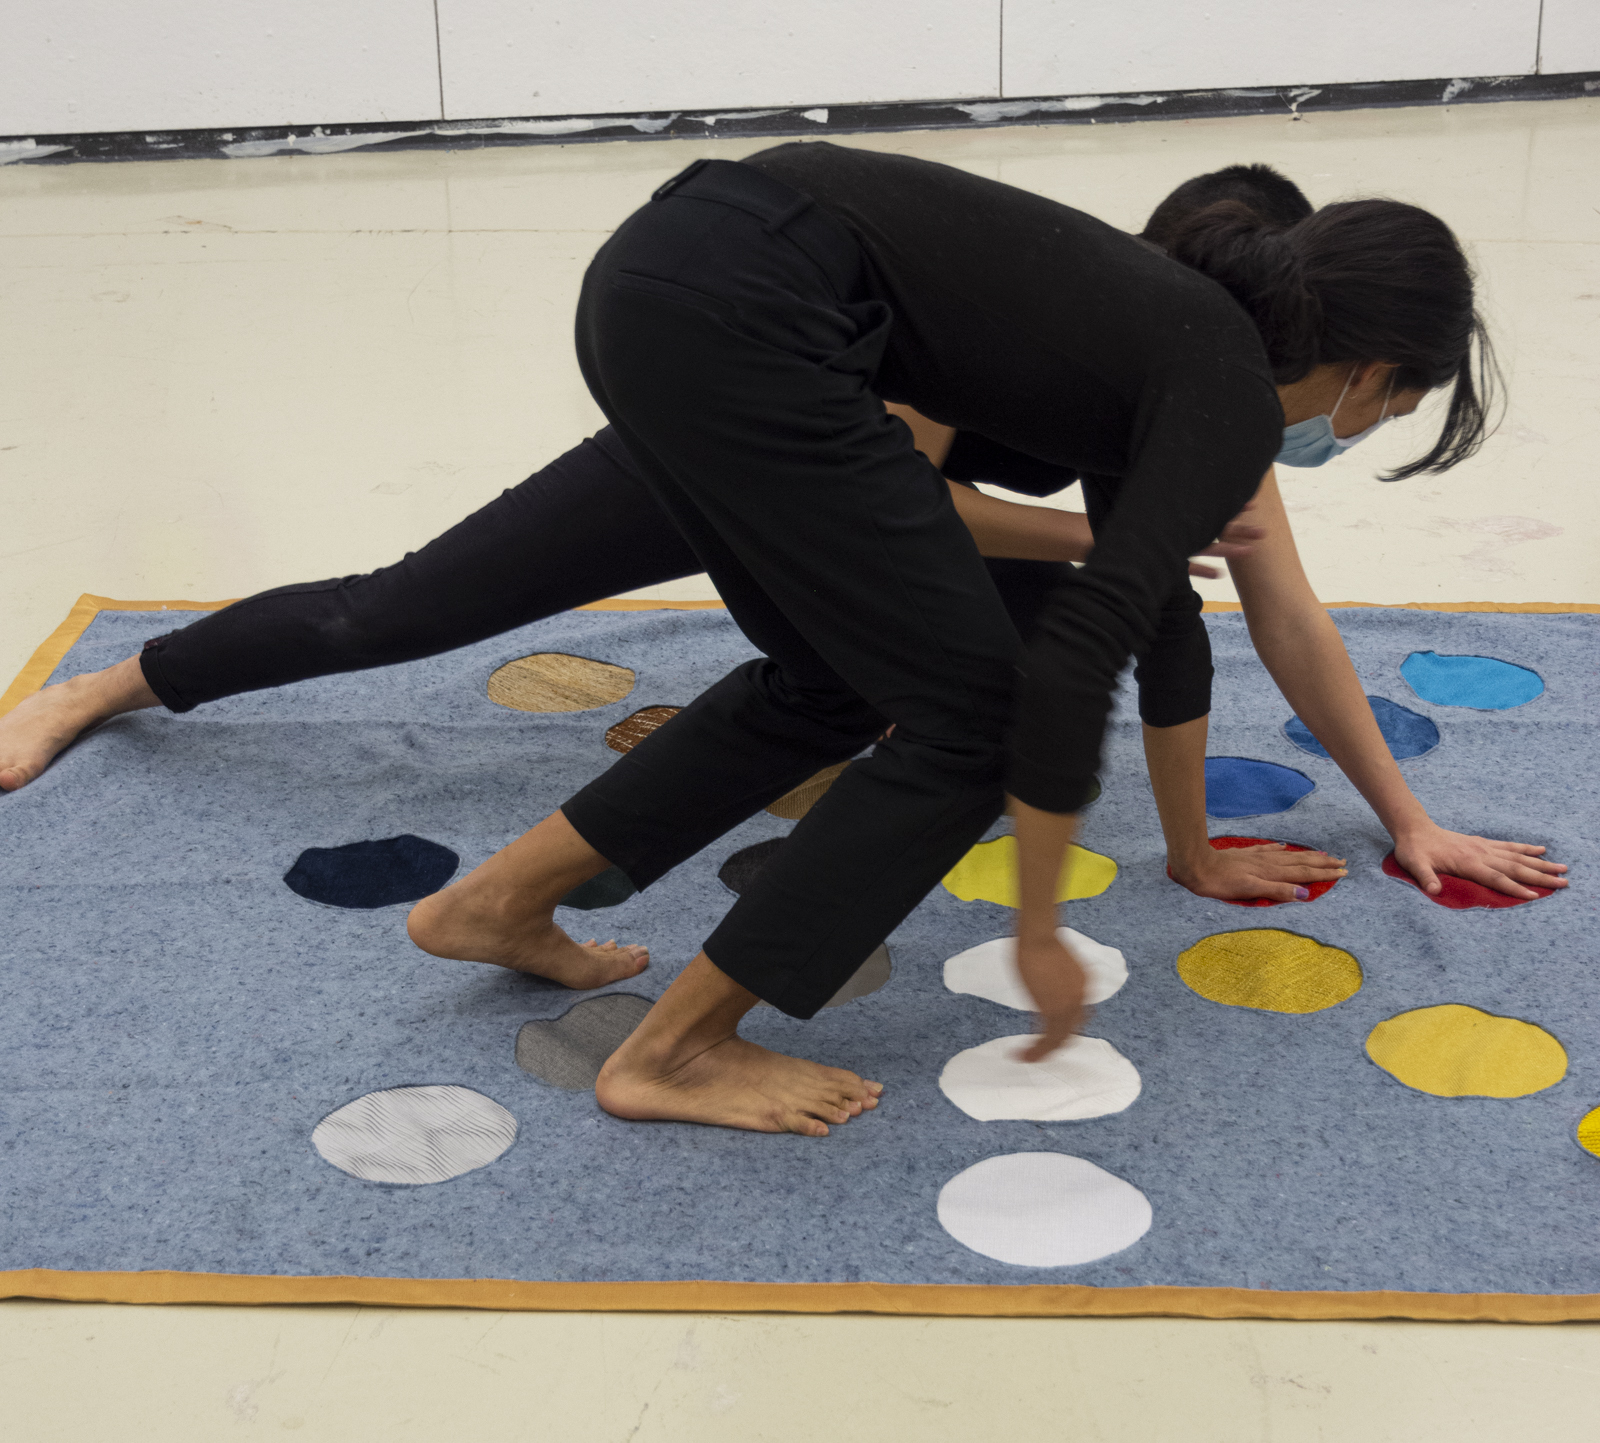 Two people wearing all black with all of their hands and feet touching the ground as if playing the game of twister. The mat they are playing on has colorful circles arranged to align in the 8 cardinal directions.